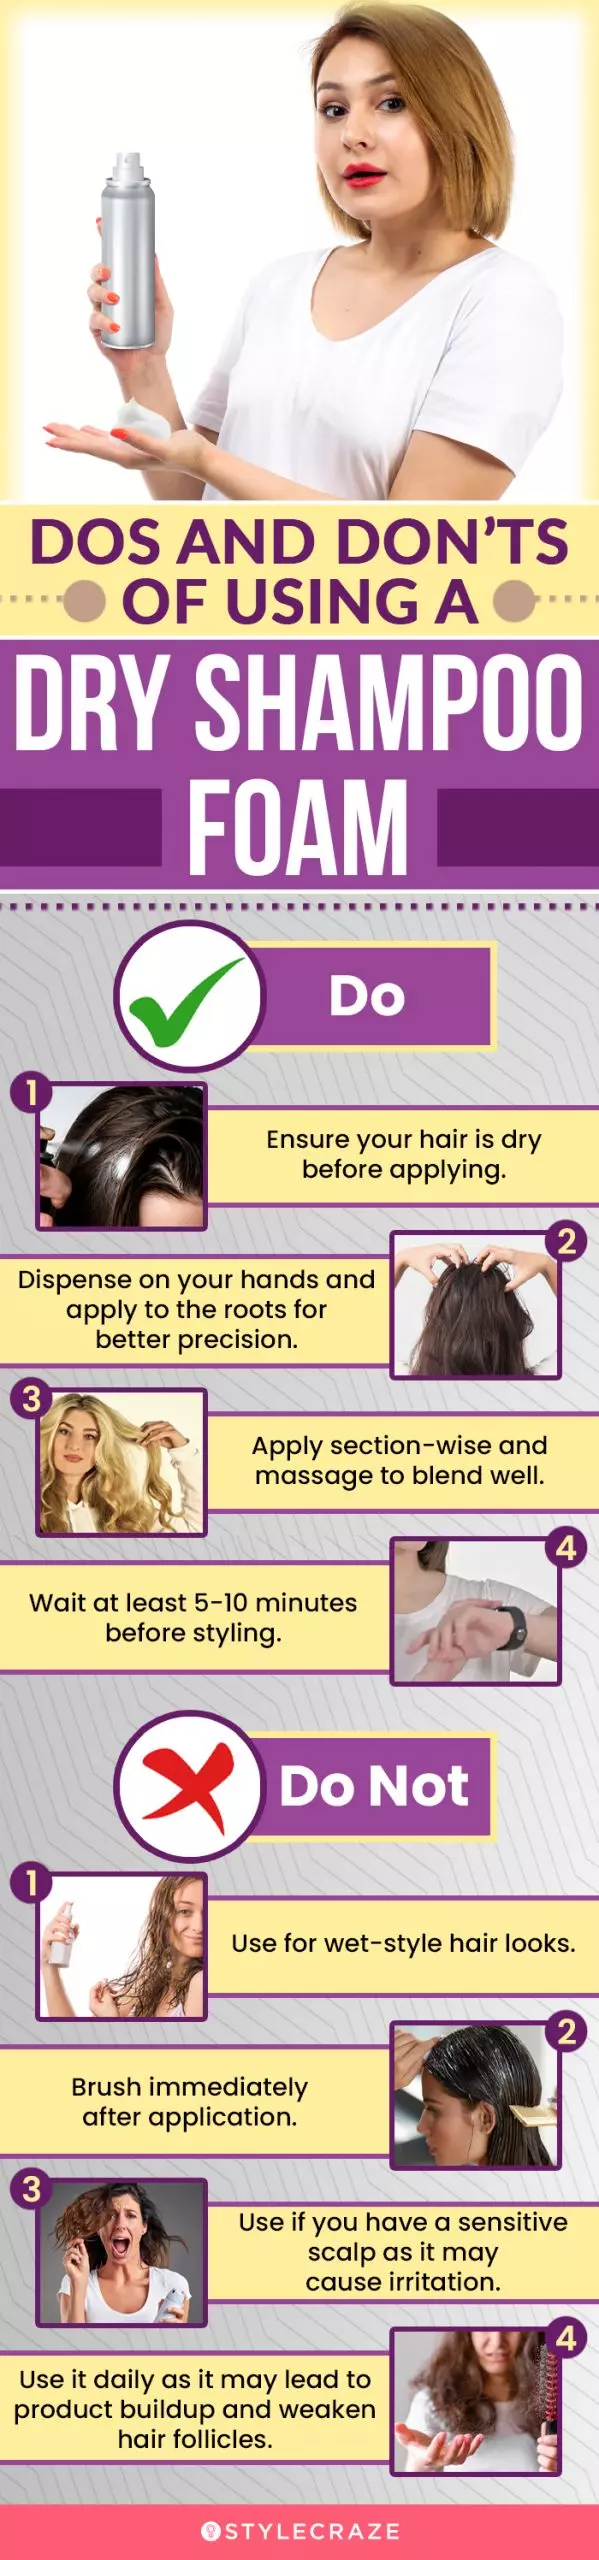 Dos And Don’ts Of Using A Dry Shampoo Foam (infographic)